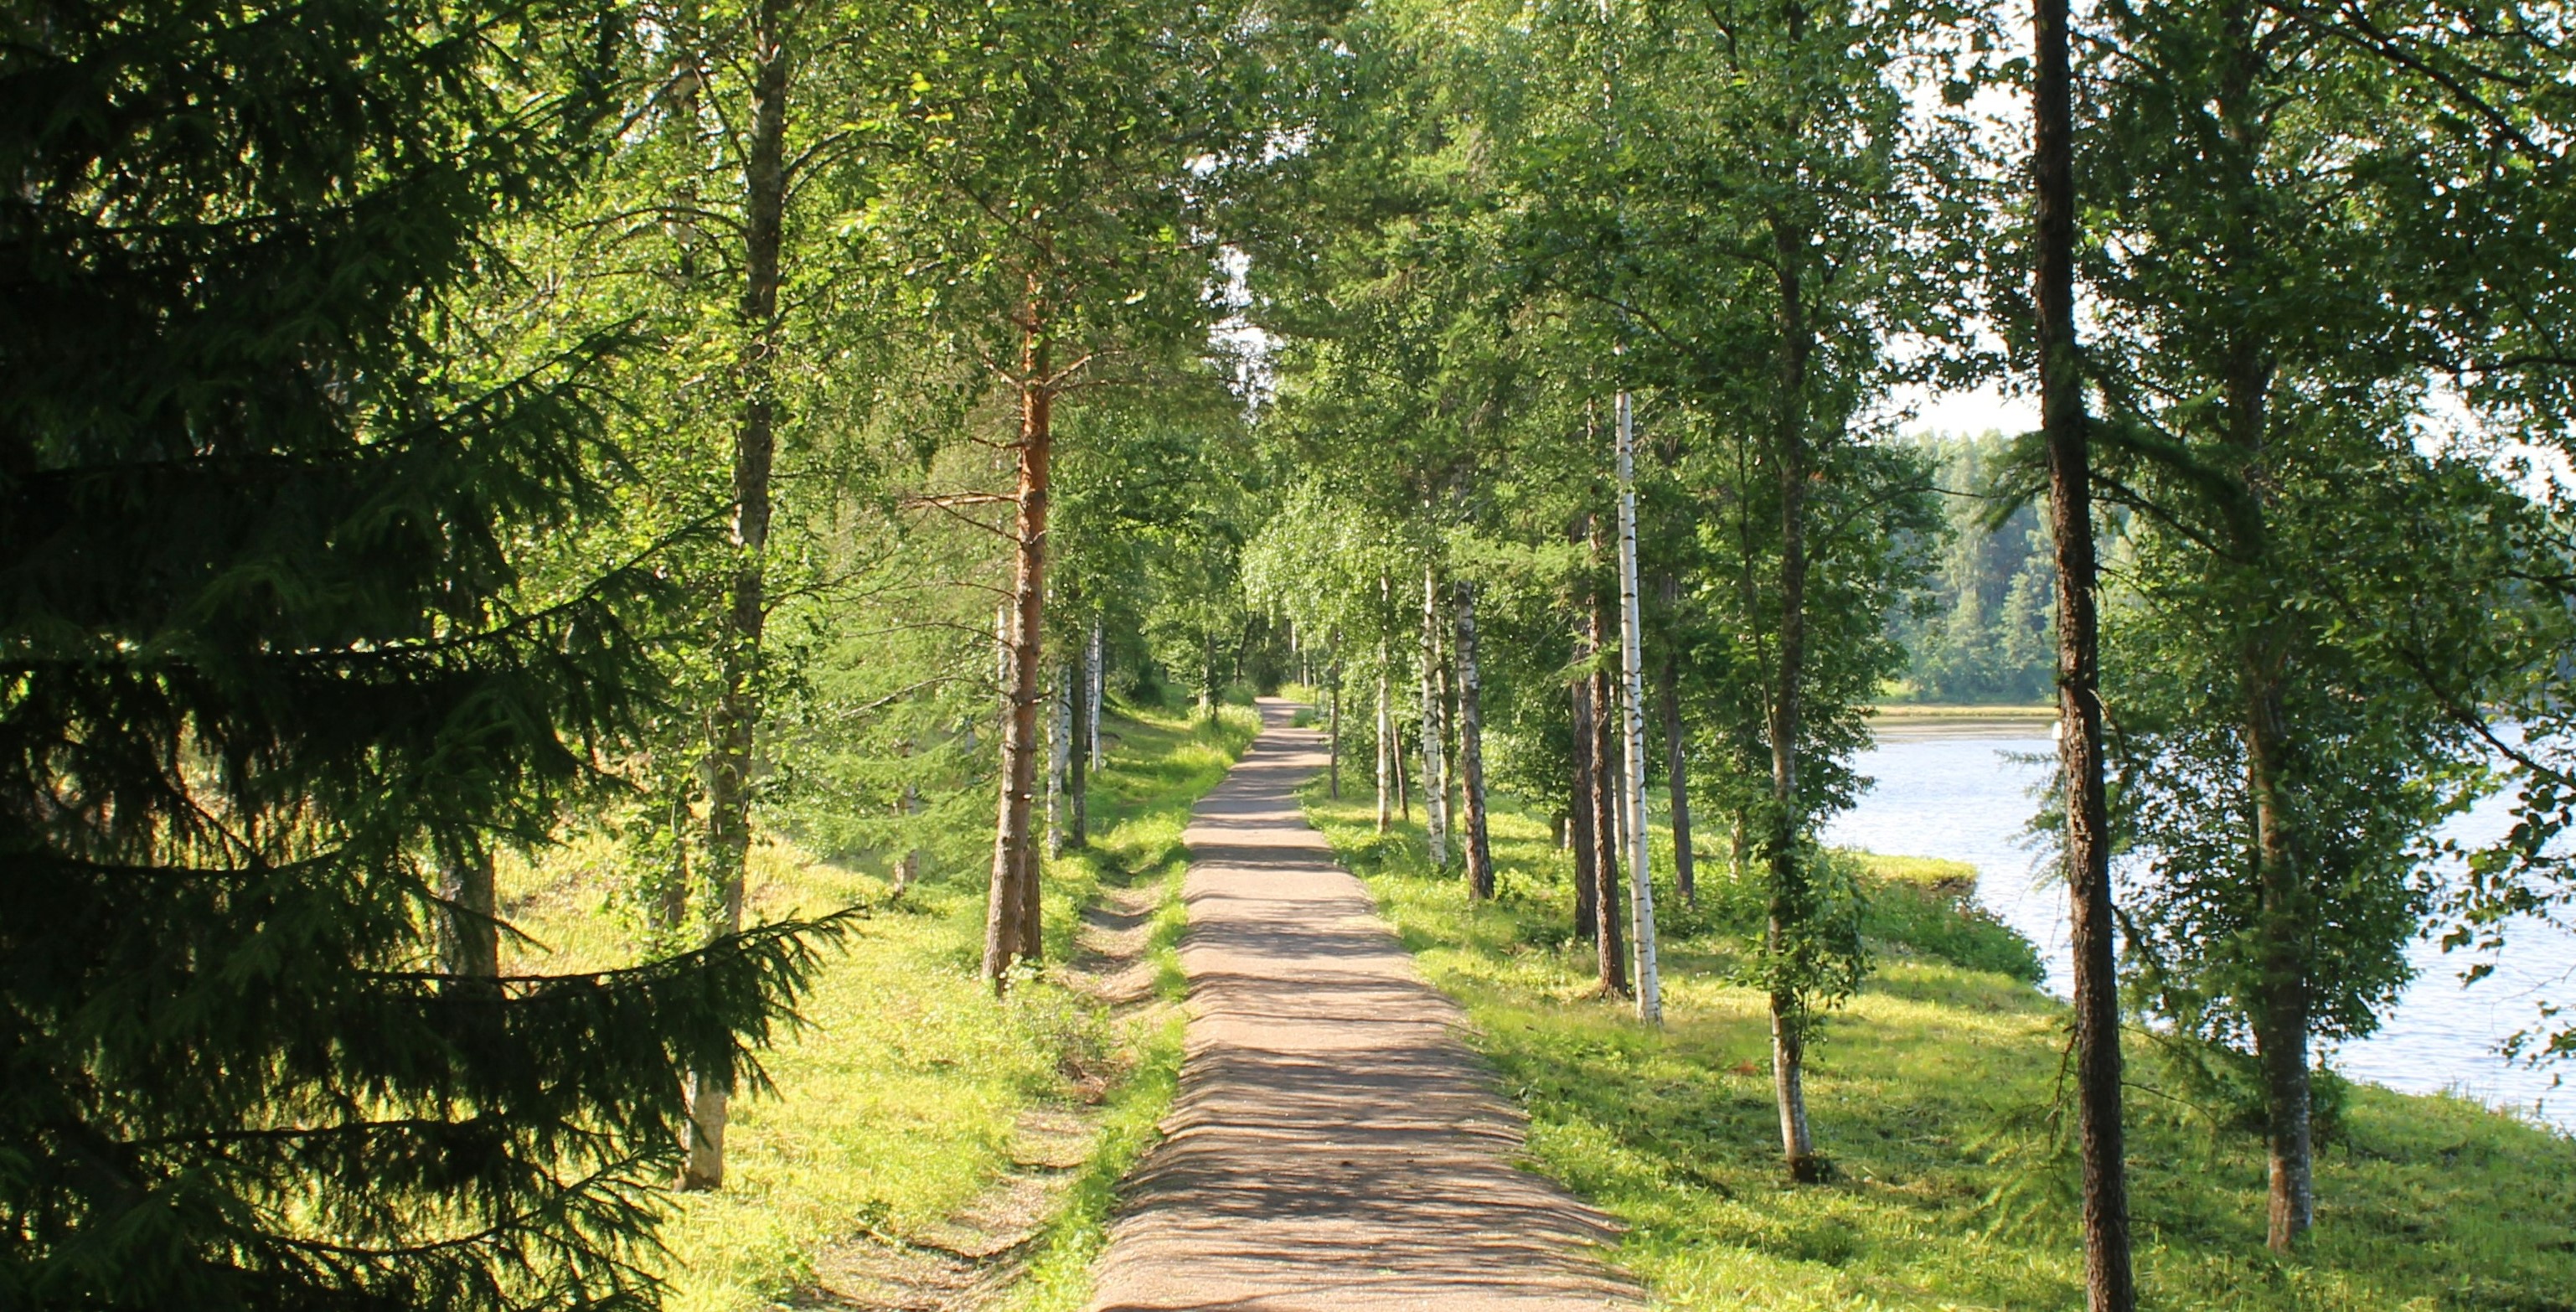 A path in green nature. There are trees along the path, and blue water in the right.